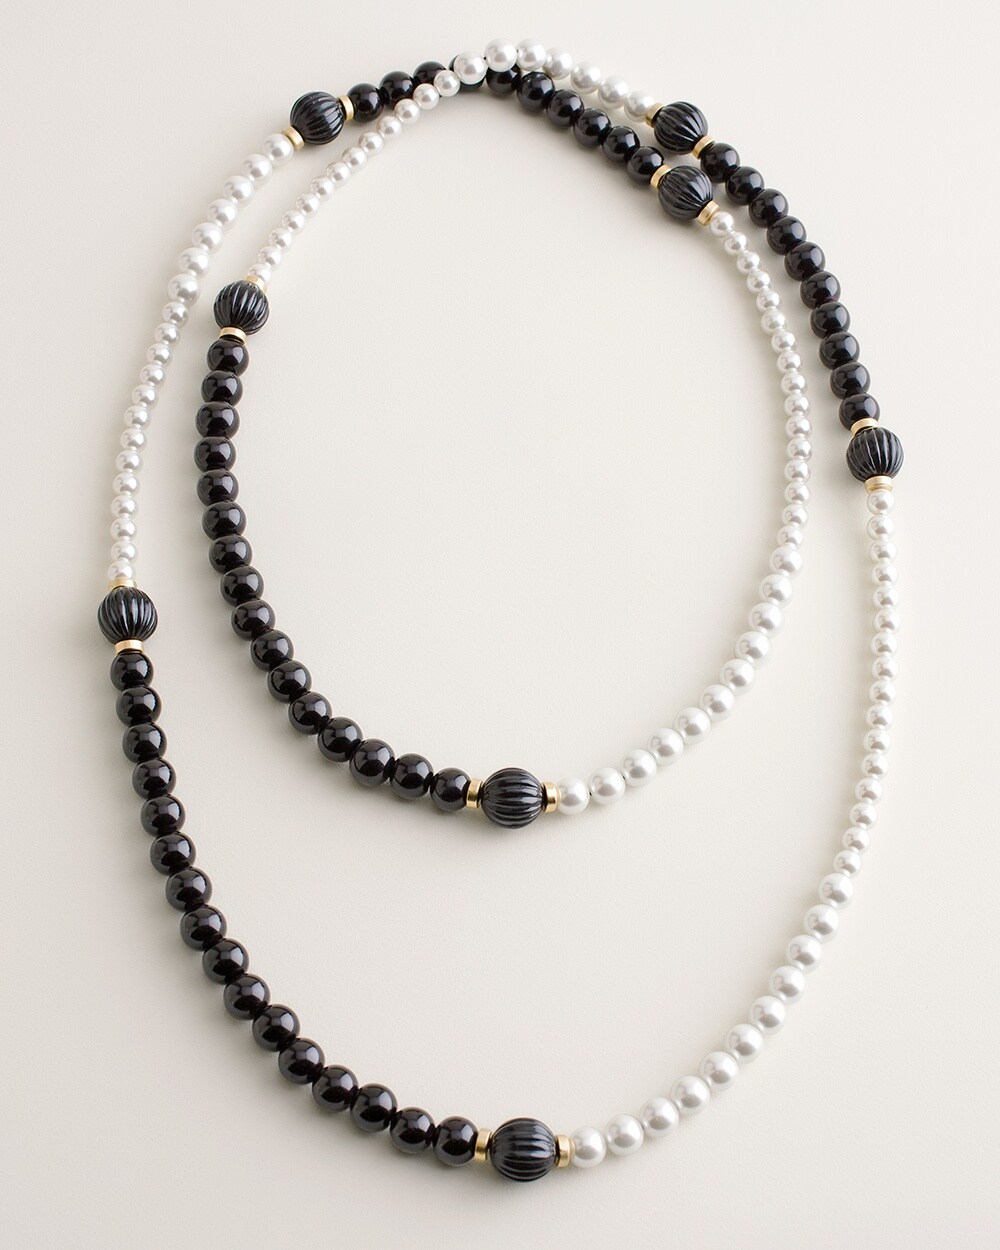 Black and White Faux-Pearl Necklace